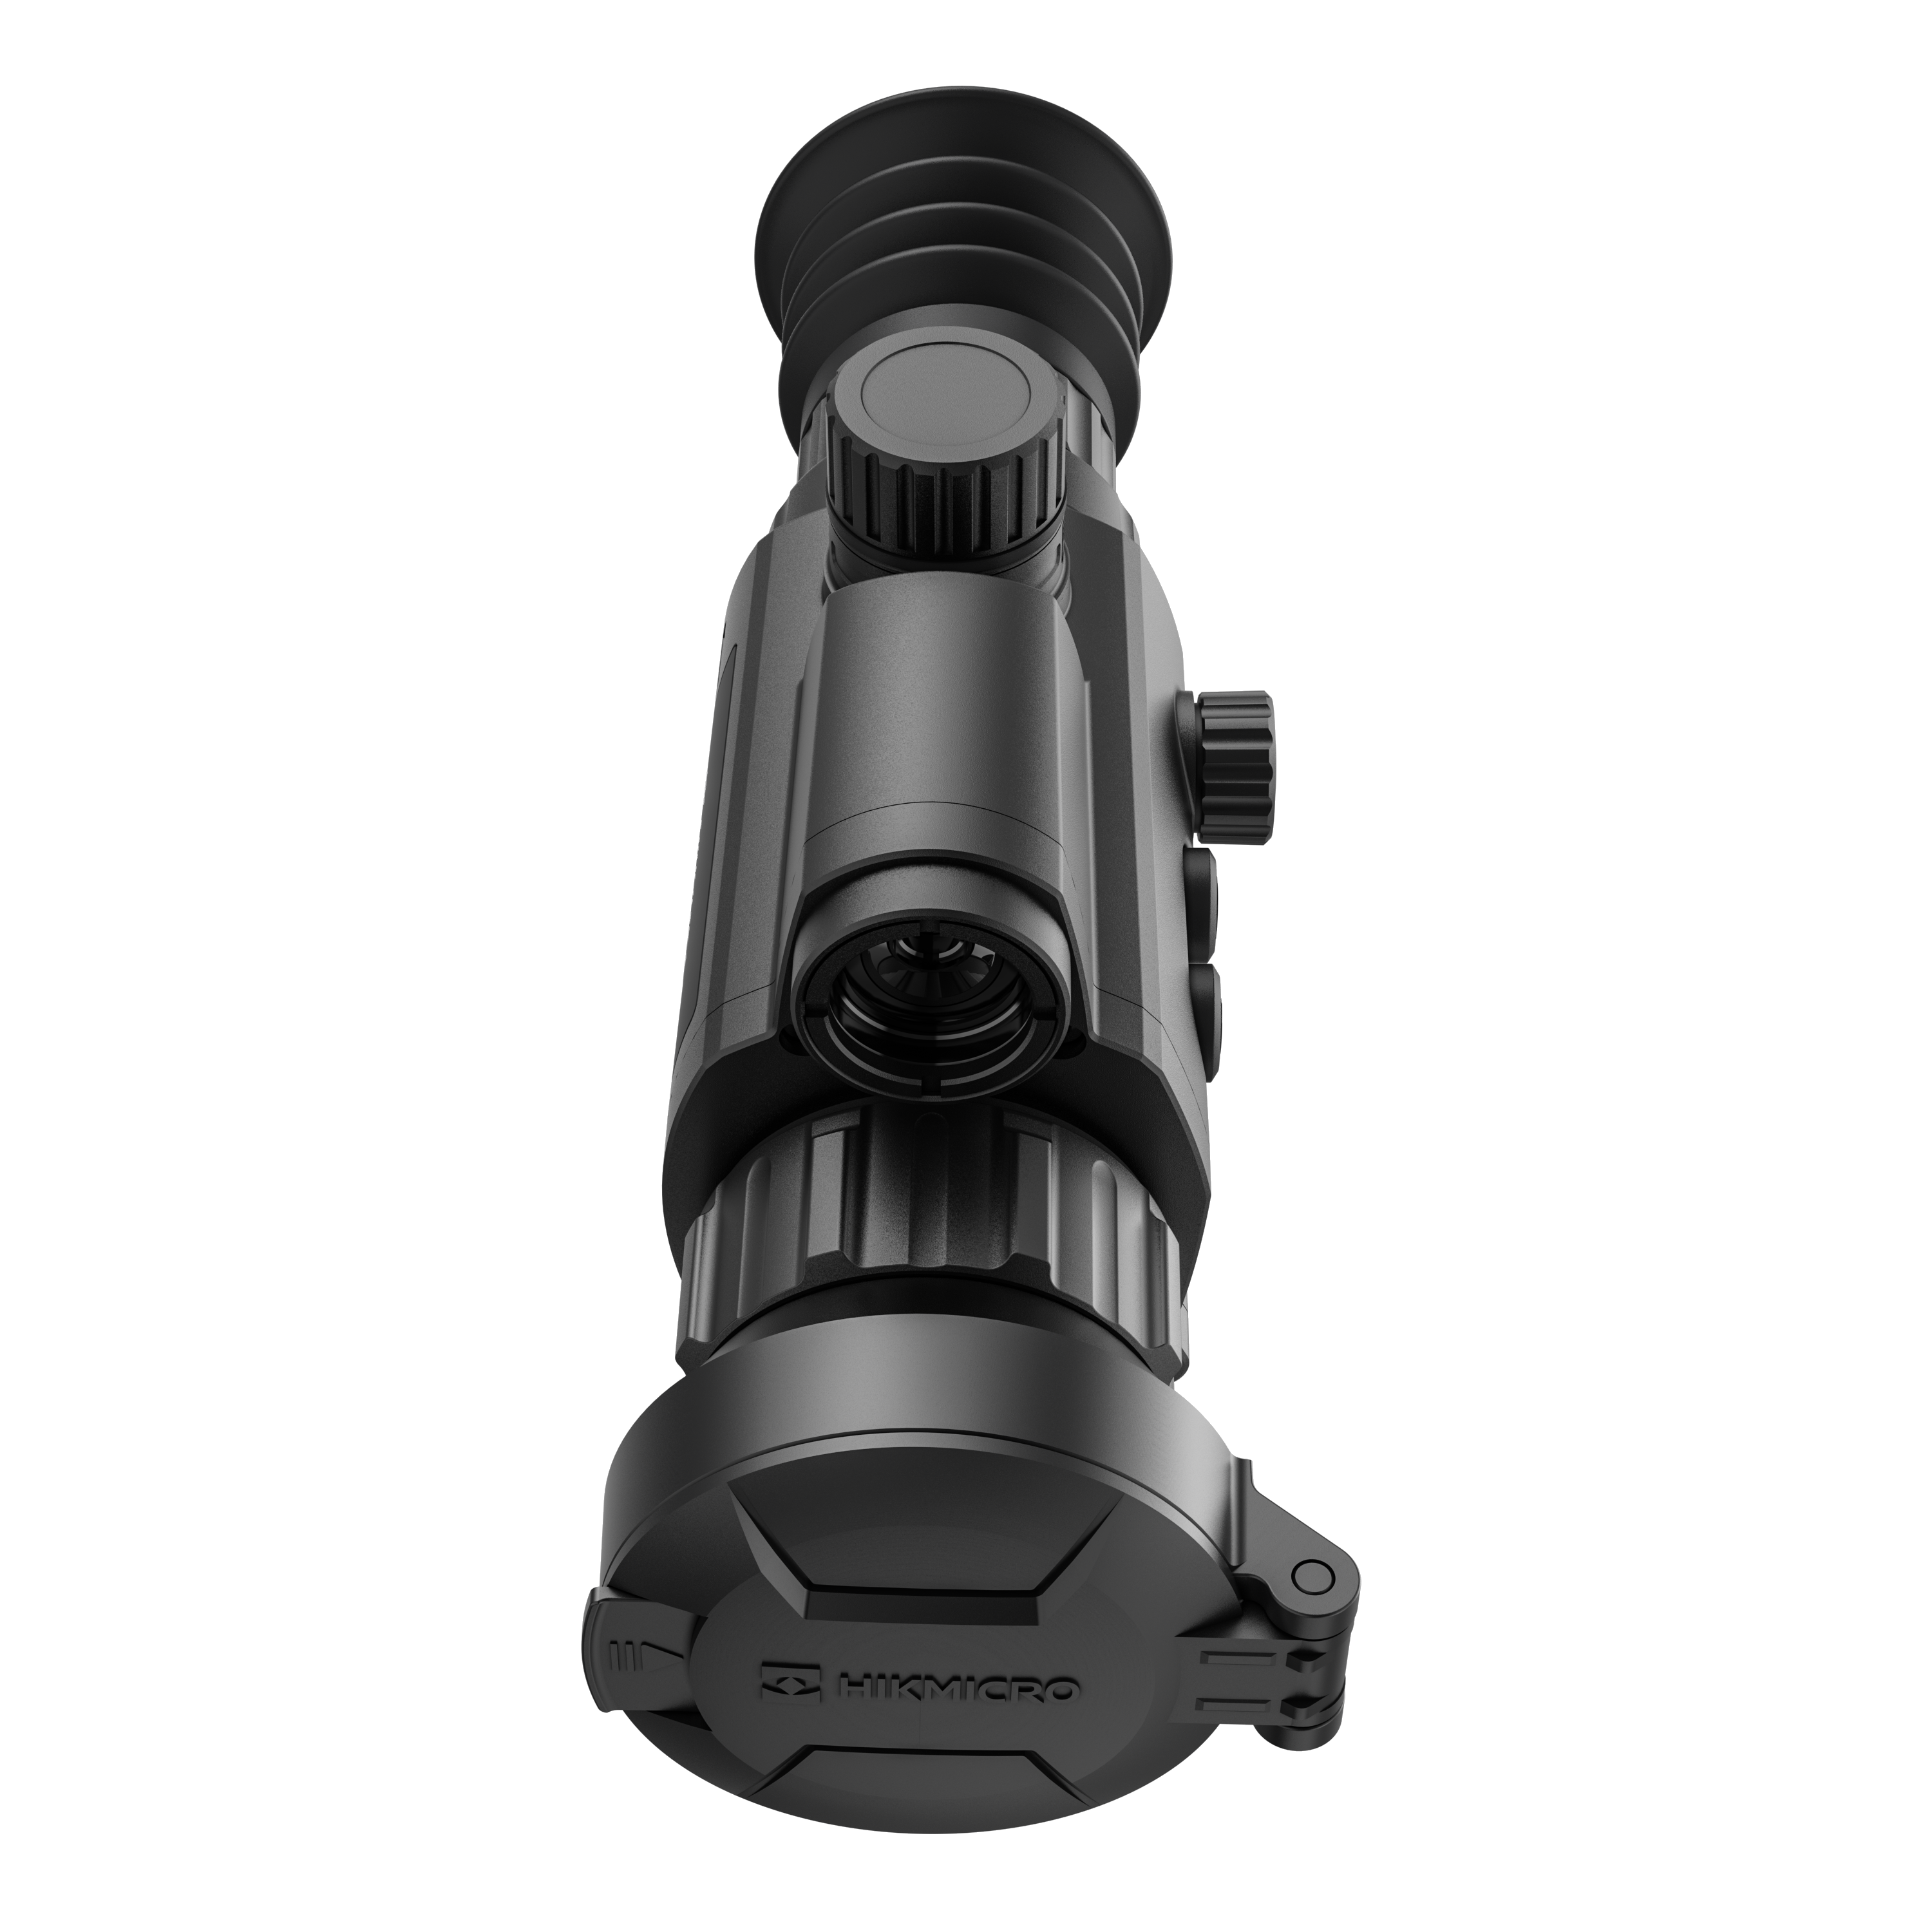 HIKMICRO Panther PQ50L 2.0 Thermal Scope - 50mm